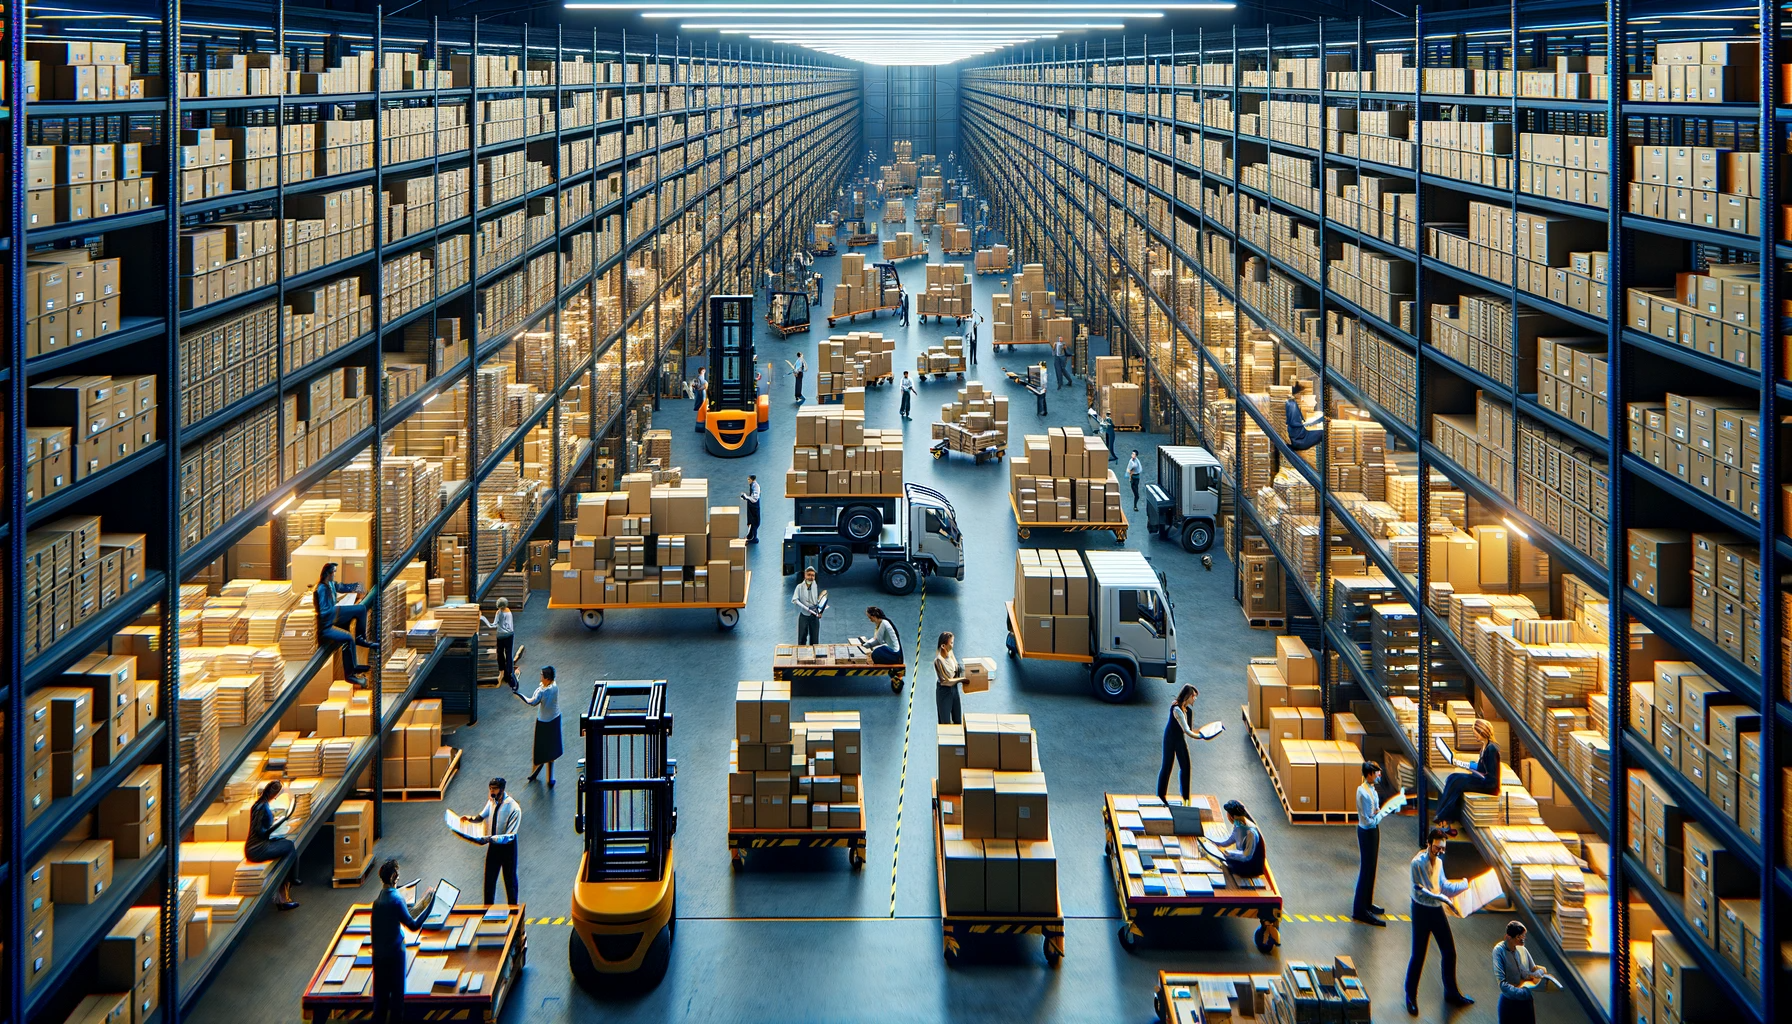 DALL·E 2023 10 27 15.52.10 Wide photo of a vast archive warehouse illuminated by overhead lights. Rows upon rows of shelves are stacked with neatly organized boxes. Diverse male